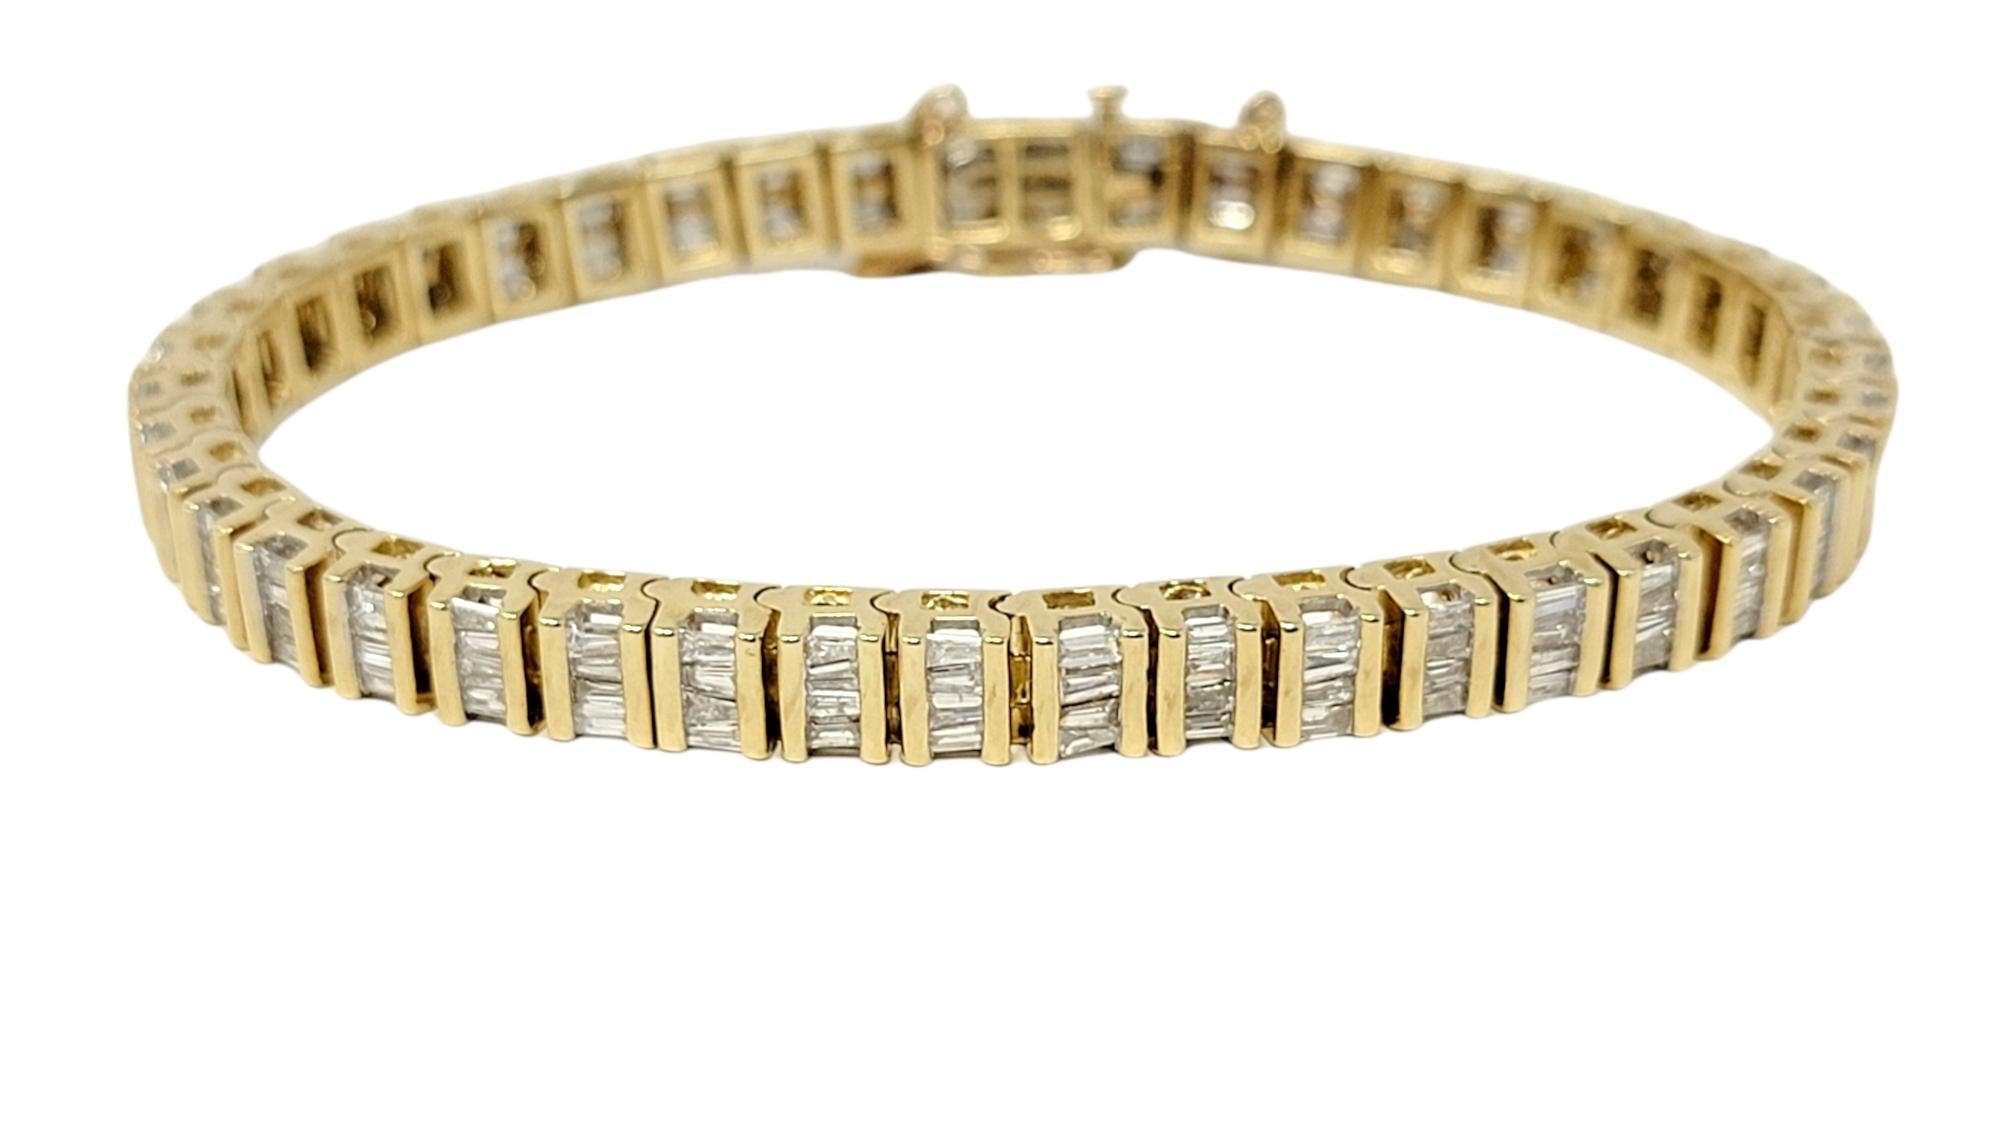 This is an absolutely beautiful diamond tennis bracelet with a sleek, contemporary design. Glittering baguette diamonds are paired with elegant 14 karat yellow gold horizontal bar links, giving a slightly modernized feel, while still remaining